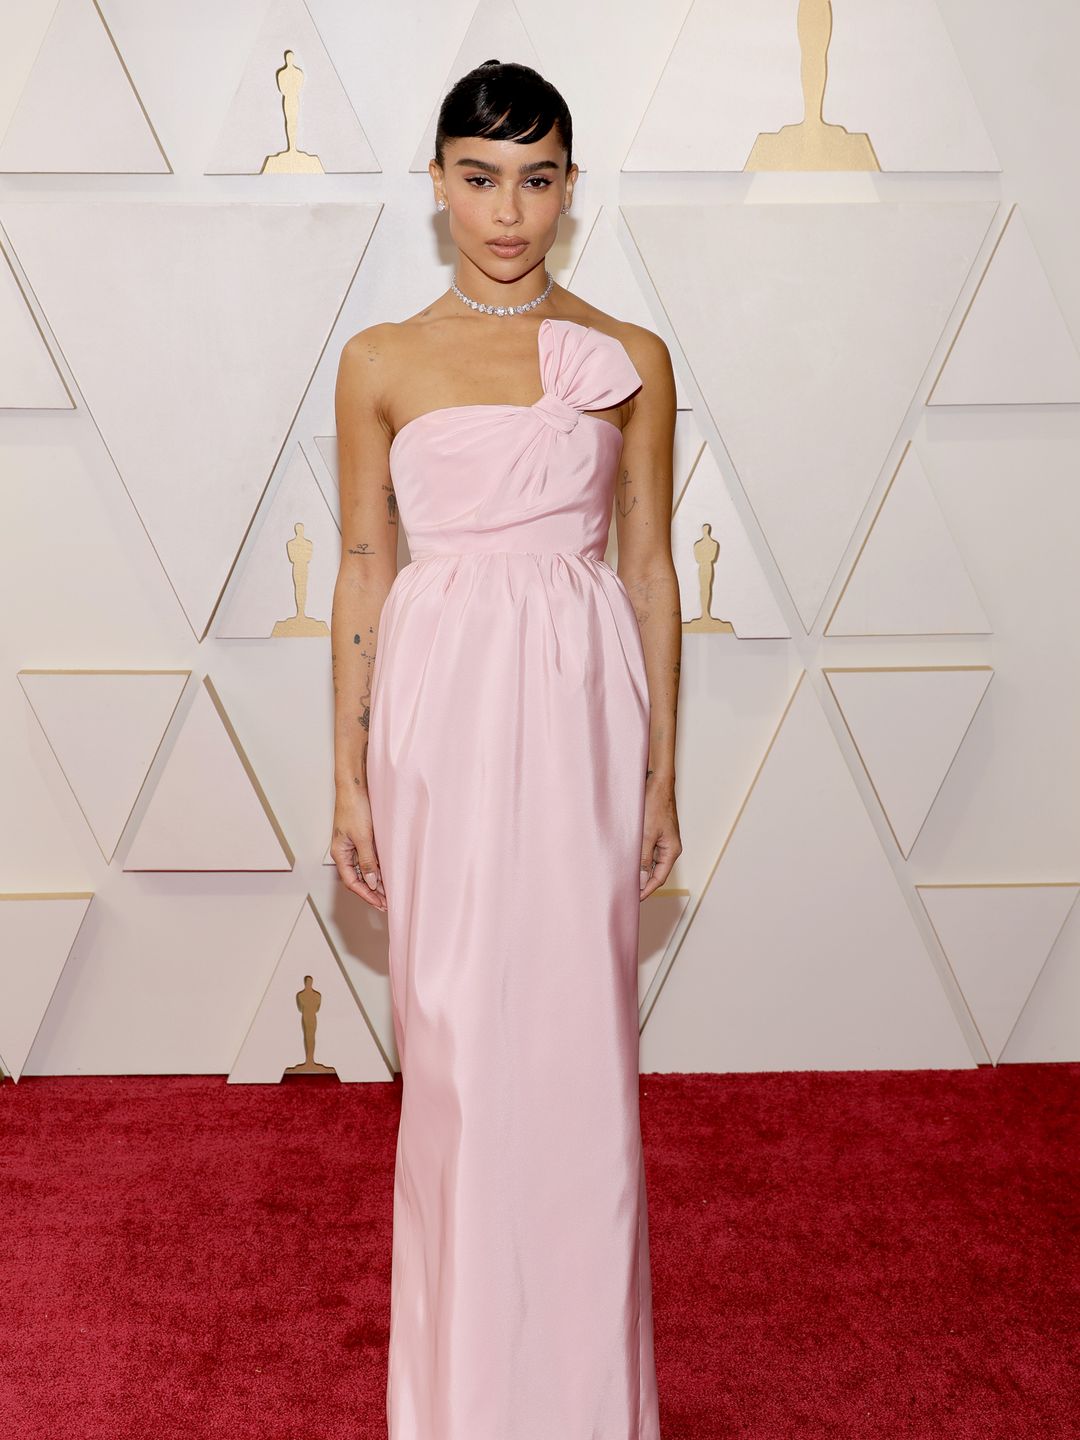 Zoë Kravitz attends the 94th Annual Academy Awards in a baby pink strapless gown